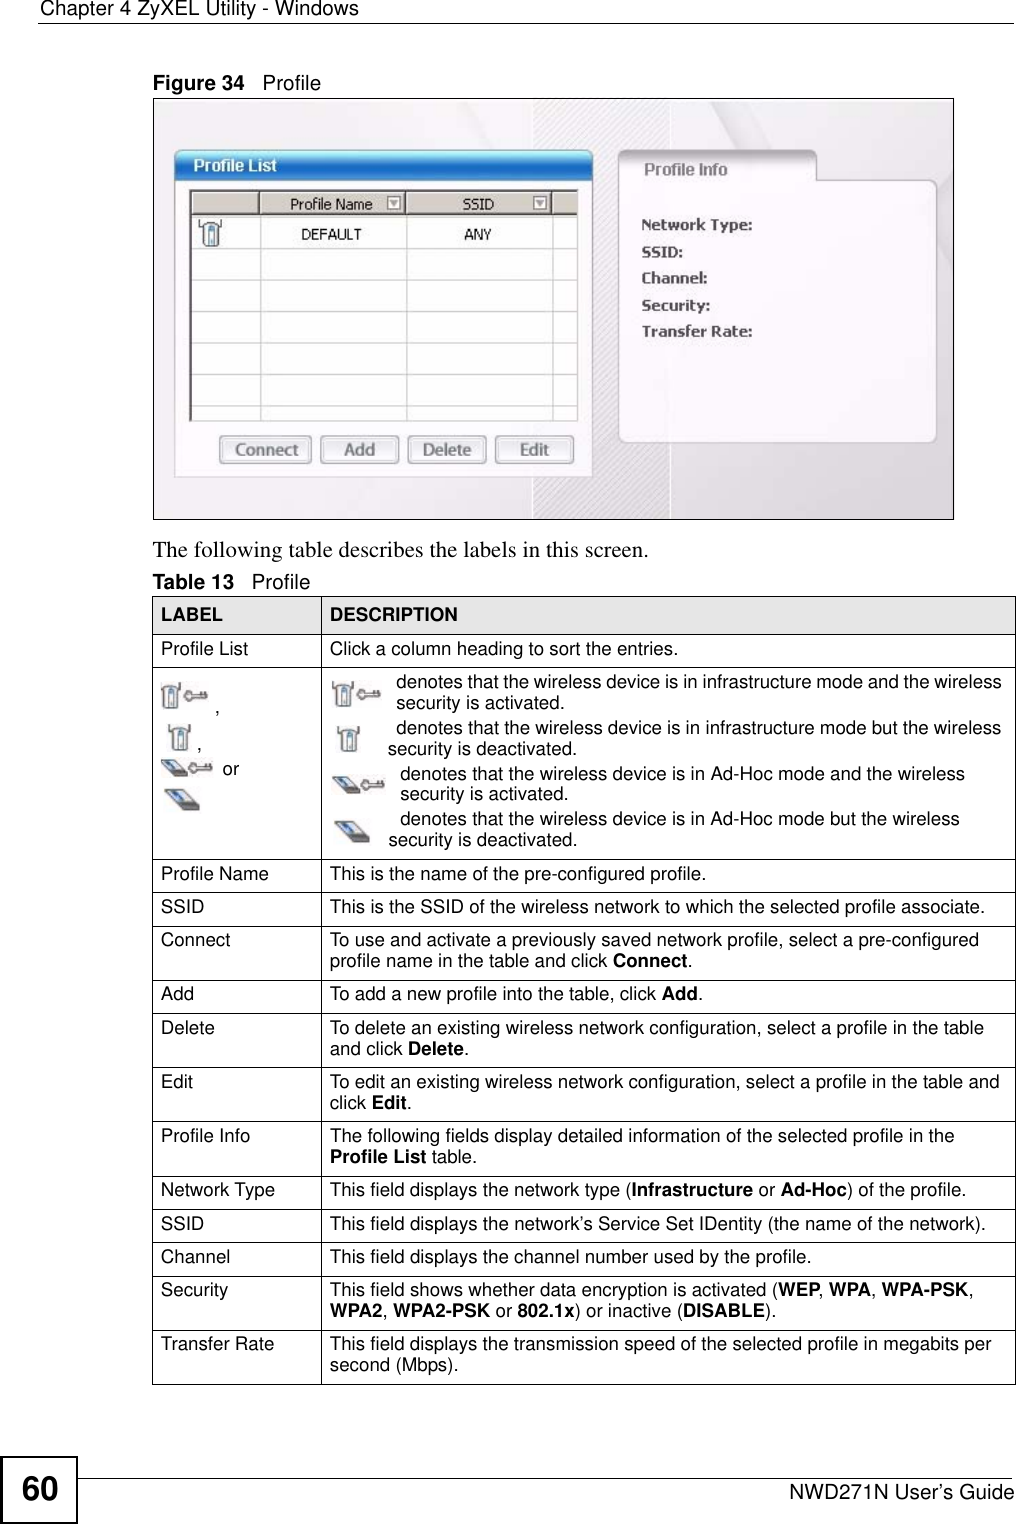 Chapter 4 ZyXEL Utility - WindowsNWD271N User’s Guide60Figure 34   Profile  The following table describes the labels in this screen. Table 13   Profile LABEL DESCRIPTIONProfile List Click a column heading to sort the entries.,, ordenotes that the wireless device is in infrastructure mode and the wireless security is activated.denotes that the wireless device is in infrastructure mode but the wireless security is deactivated.denotes that the wireless device is in Ad-Hoc mode and the wireless security is activated.denotes that the wireless device is in Ad-Hoc mode but the wireless security is deactivated.Profile Name This is the name of the pre-configured profile.SSID This is the SSID of the wireless network to which the selected profile associate.Connect  To use and activate a previously saved network profile, select a pre-configured profile name in the table and click Connect.Add  To add a new profile into the table, click Add.Delete To delete an existing wireless network configuration, select a profile in the table and click Delete.Edit To edit an existing wireless network configuration, select a profile in the table and click Edit.Profile Info The following fields display detailed information of the selected profile in the Profile List table.Network Type This field displays the network type (Infrastructure or Ad-Hoc) of the profile.SSID This field displays the network’s Service Set IDentity (the name of the network).Channel This field displays the channel number used by the profile.Security This field shows whether data encryption is activated (WEP, WPA, WPA-PSK, WPA2, WPA2-PSK or 802.1x) or inactive (DISABLE).Transfer Rate This field displays the transmission speed of the selected profile in megabits per second (Mbps).